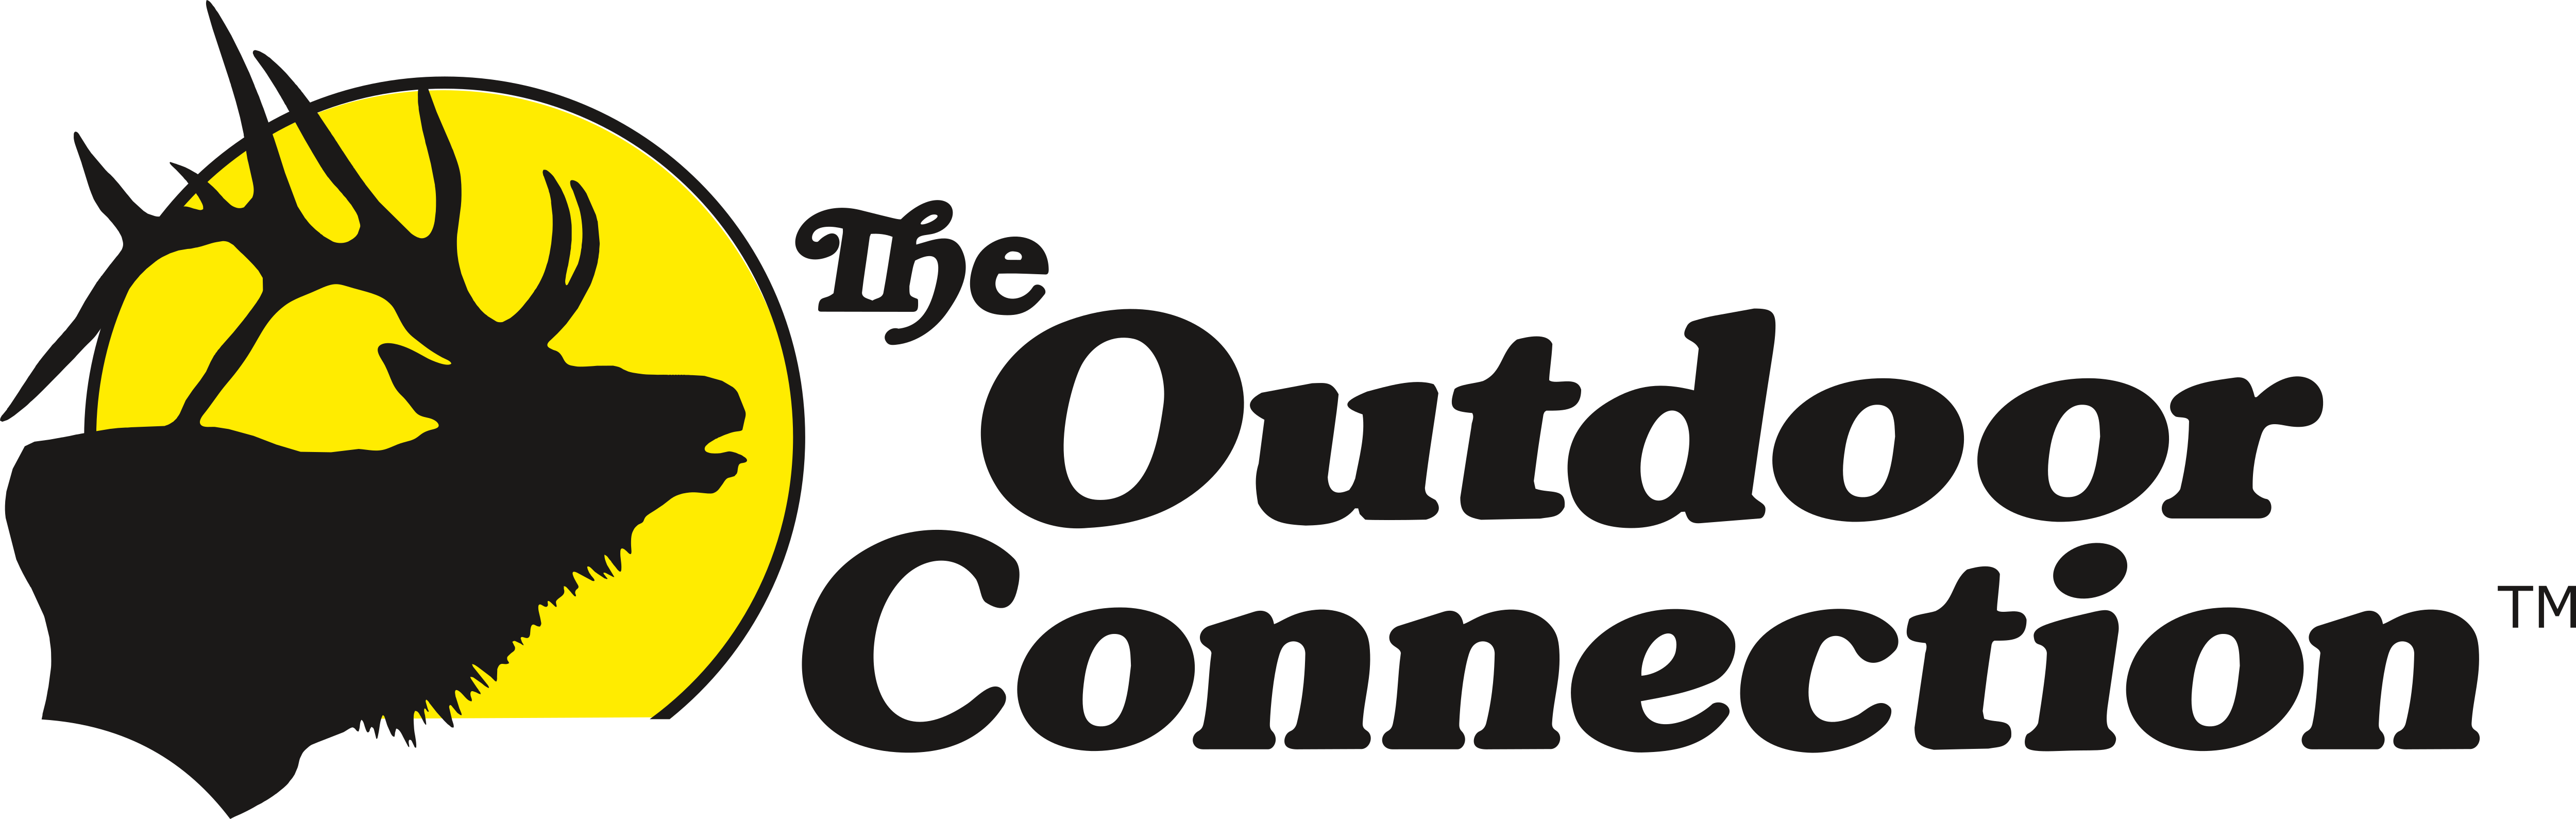 The Outdoor Connection – Logos Download